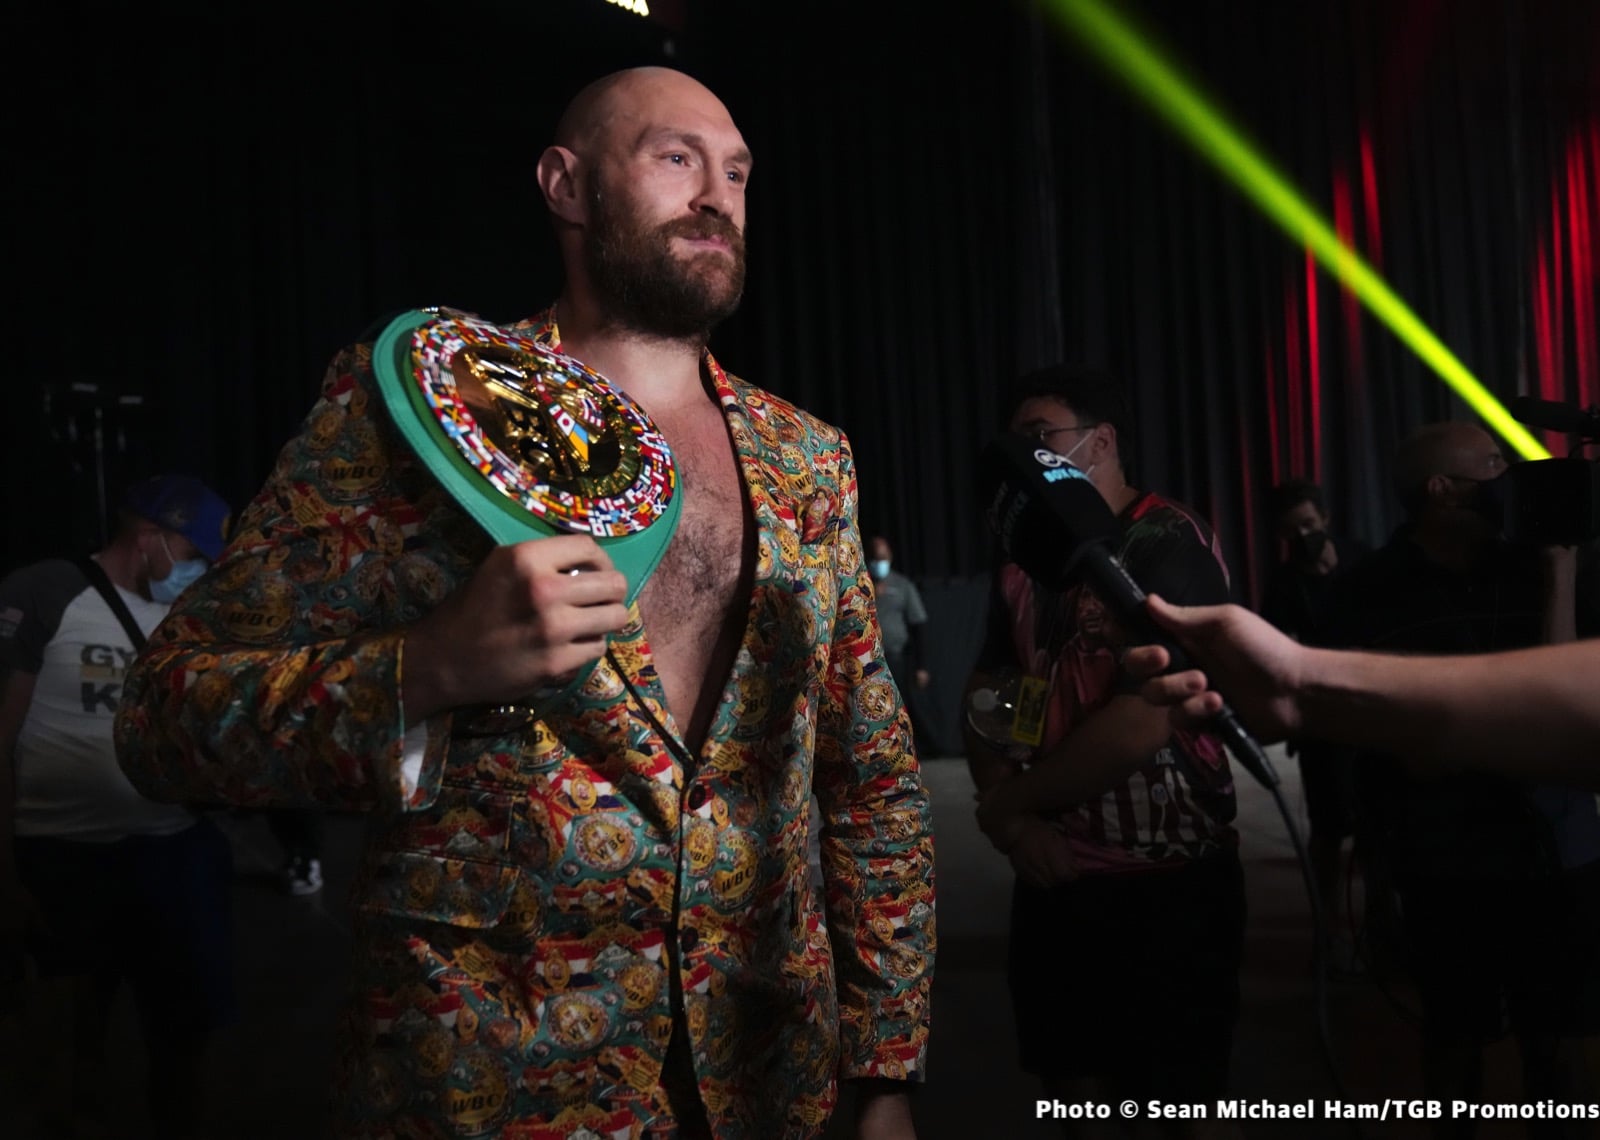 Tyson Fury vs. Deontay Wilder III Preview: Repeat for Fury or Revenge for Wilder?